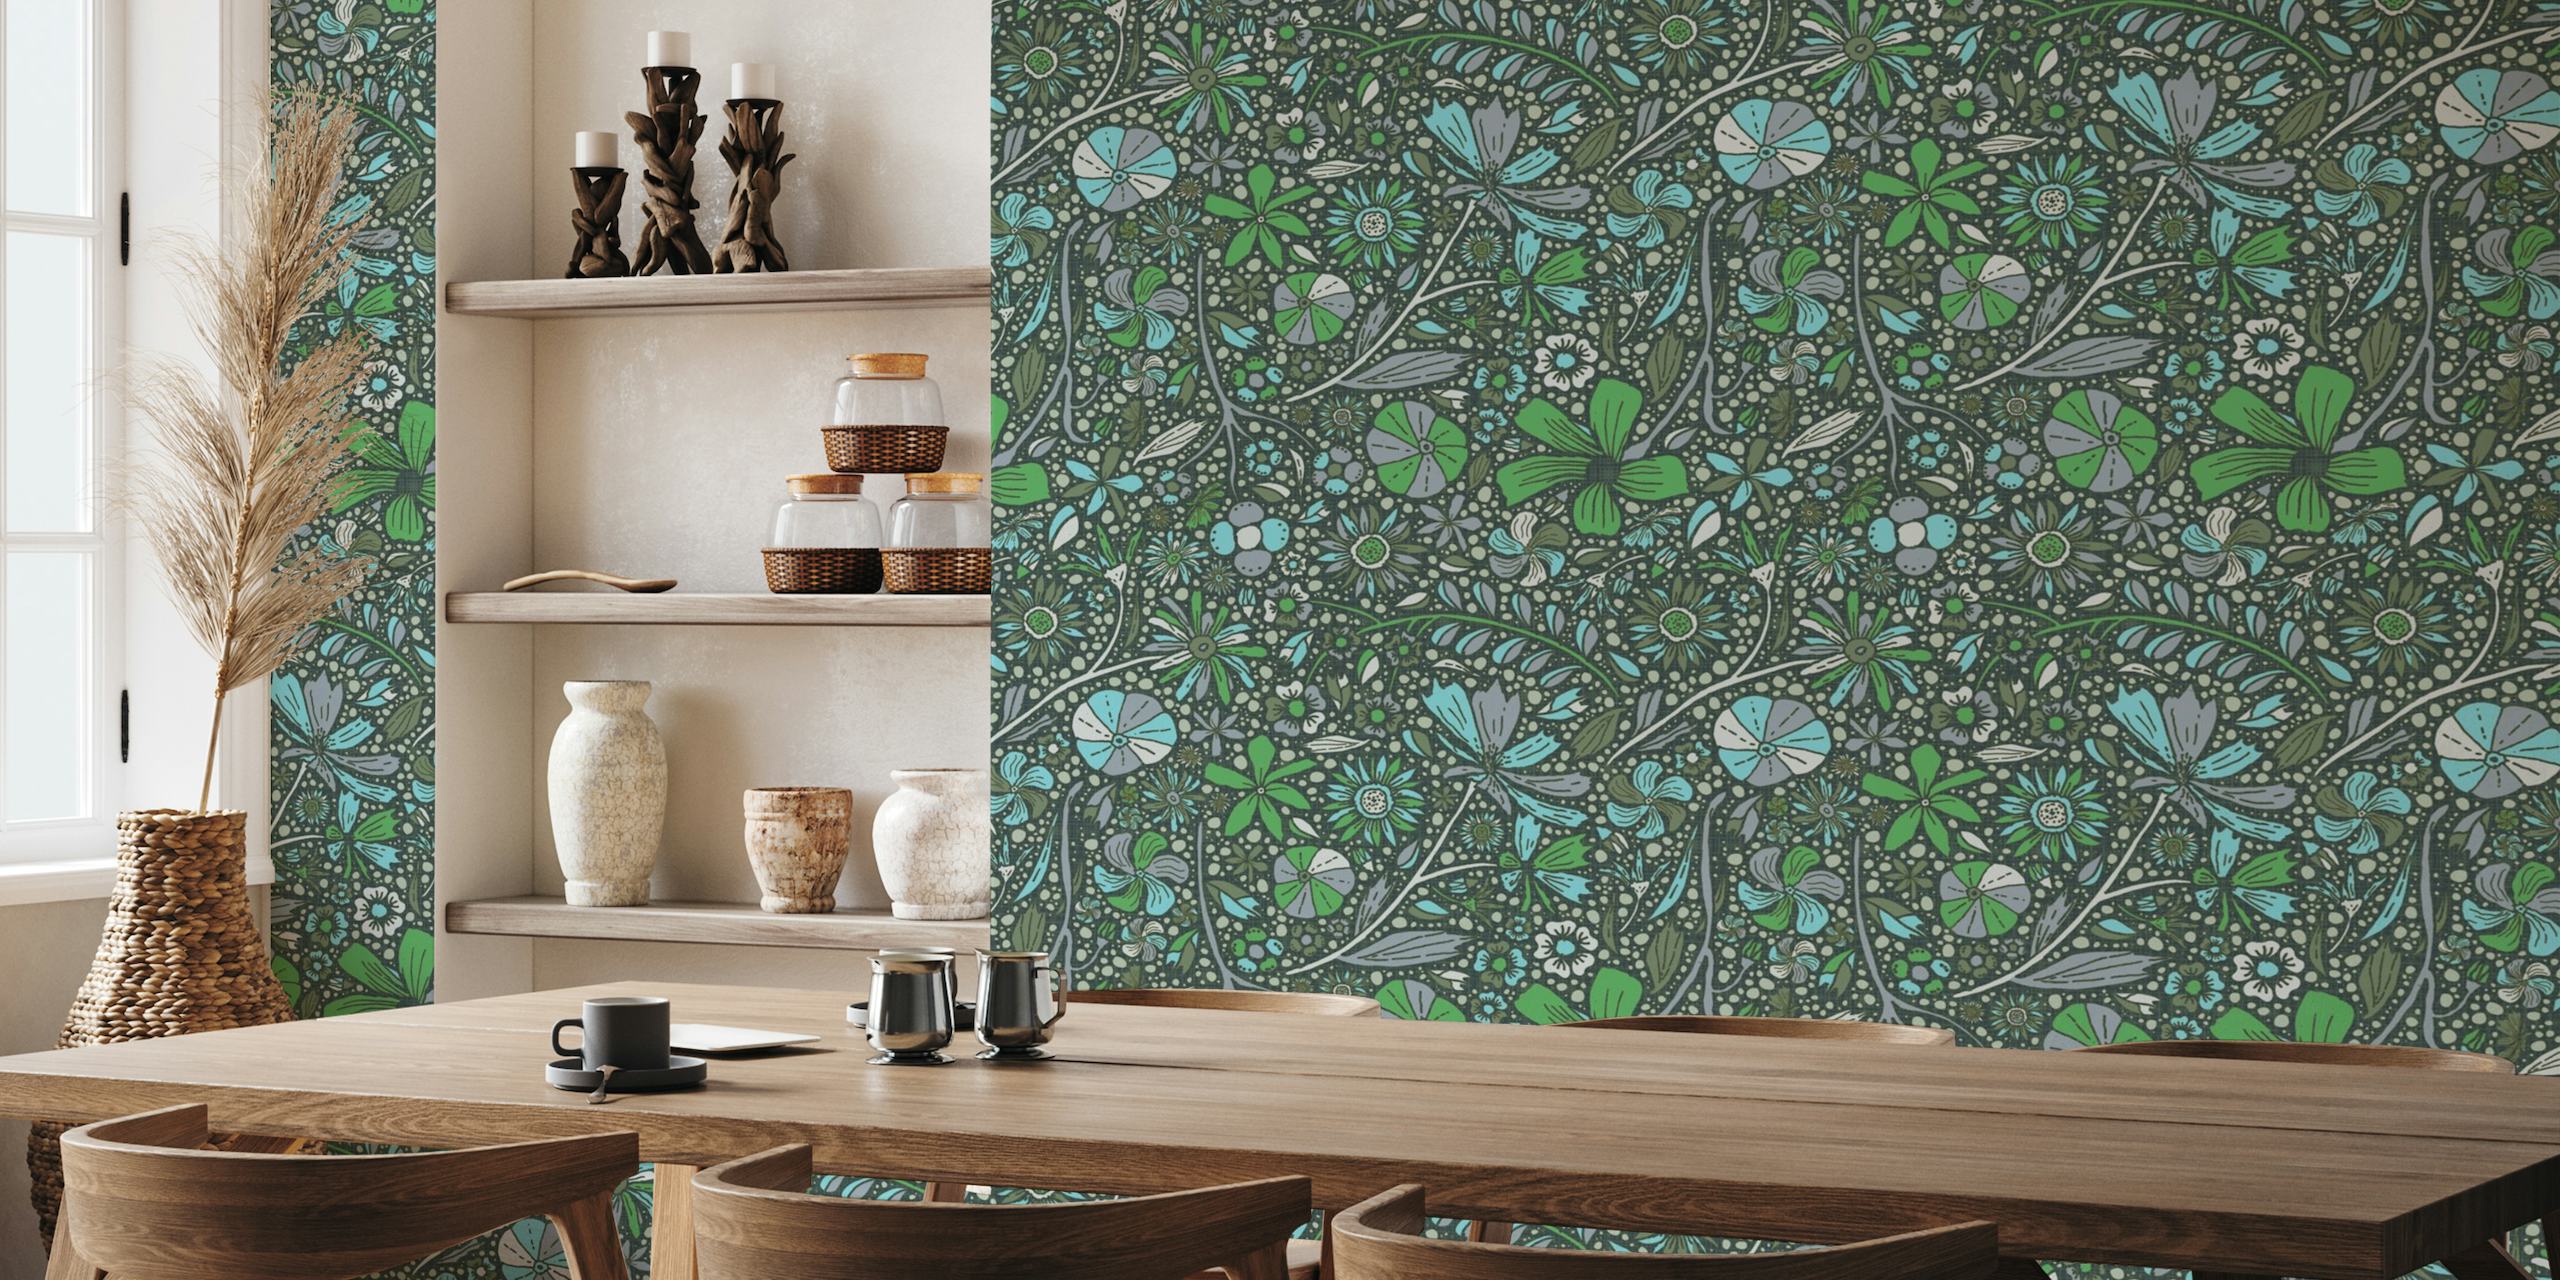 Maximalist bohemian floral pattern blue and teal ταπετσαρία